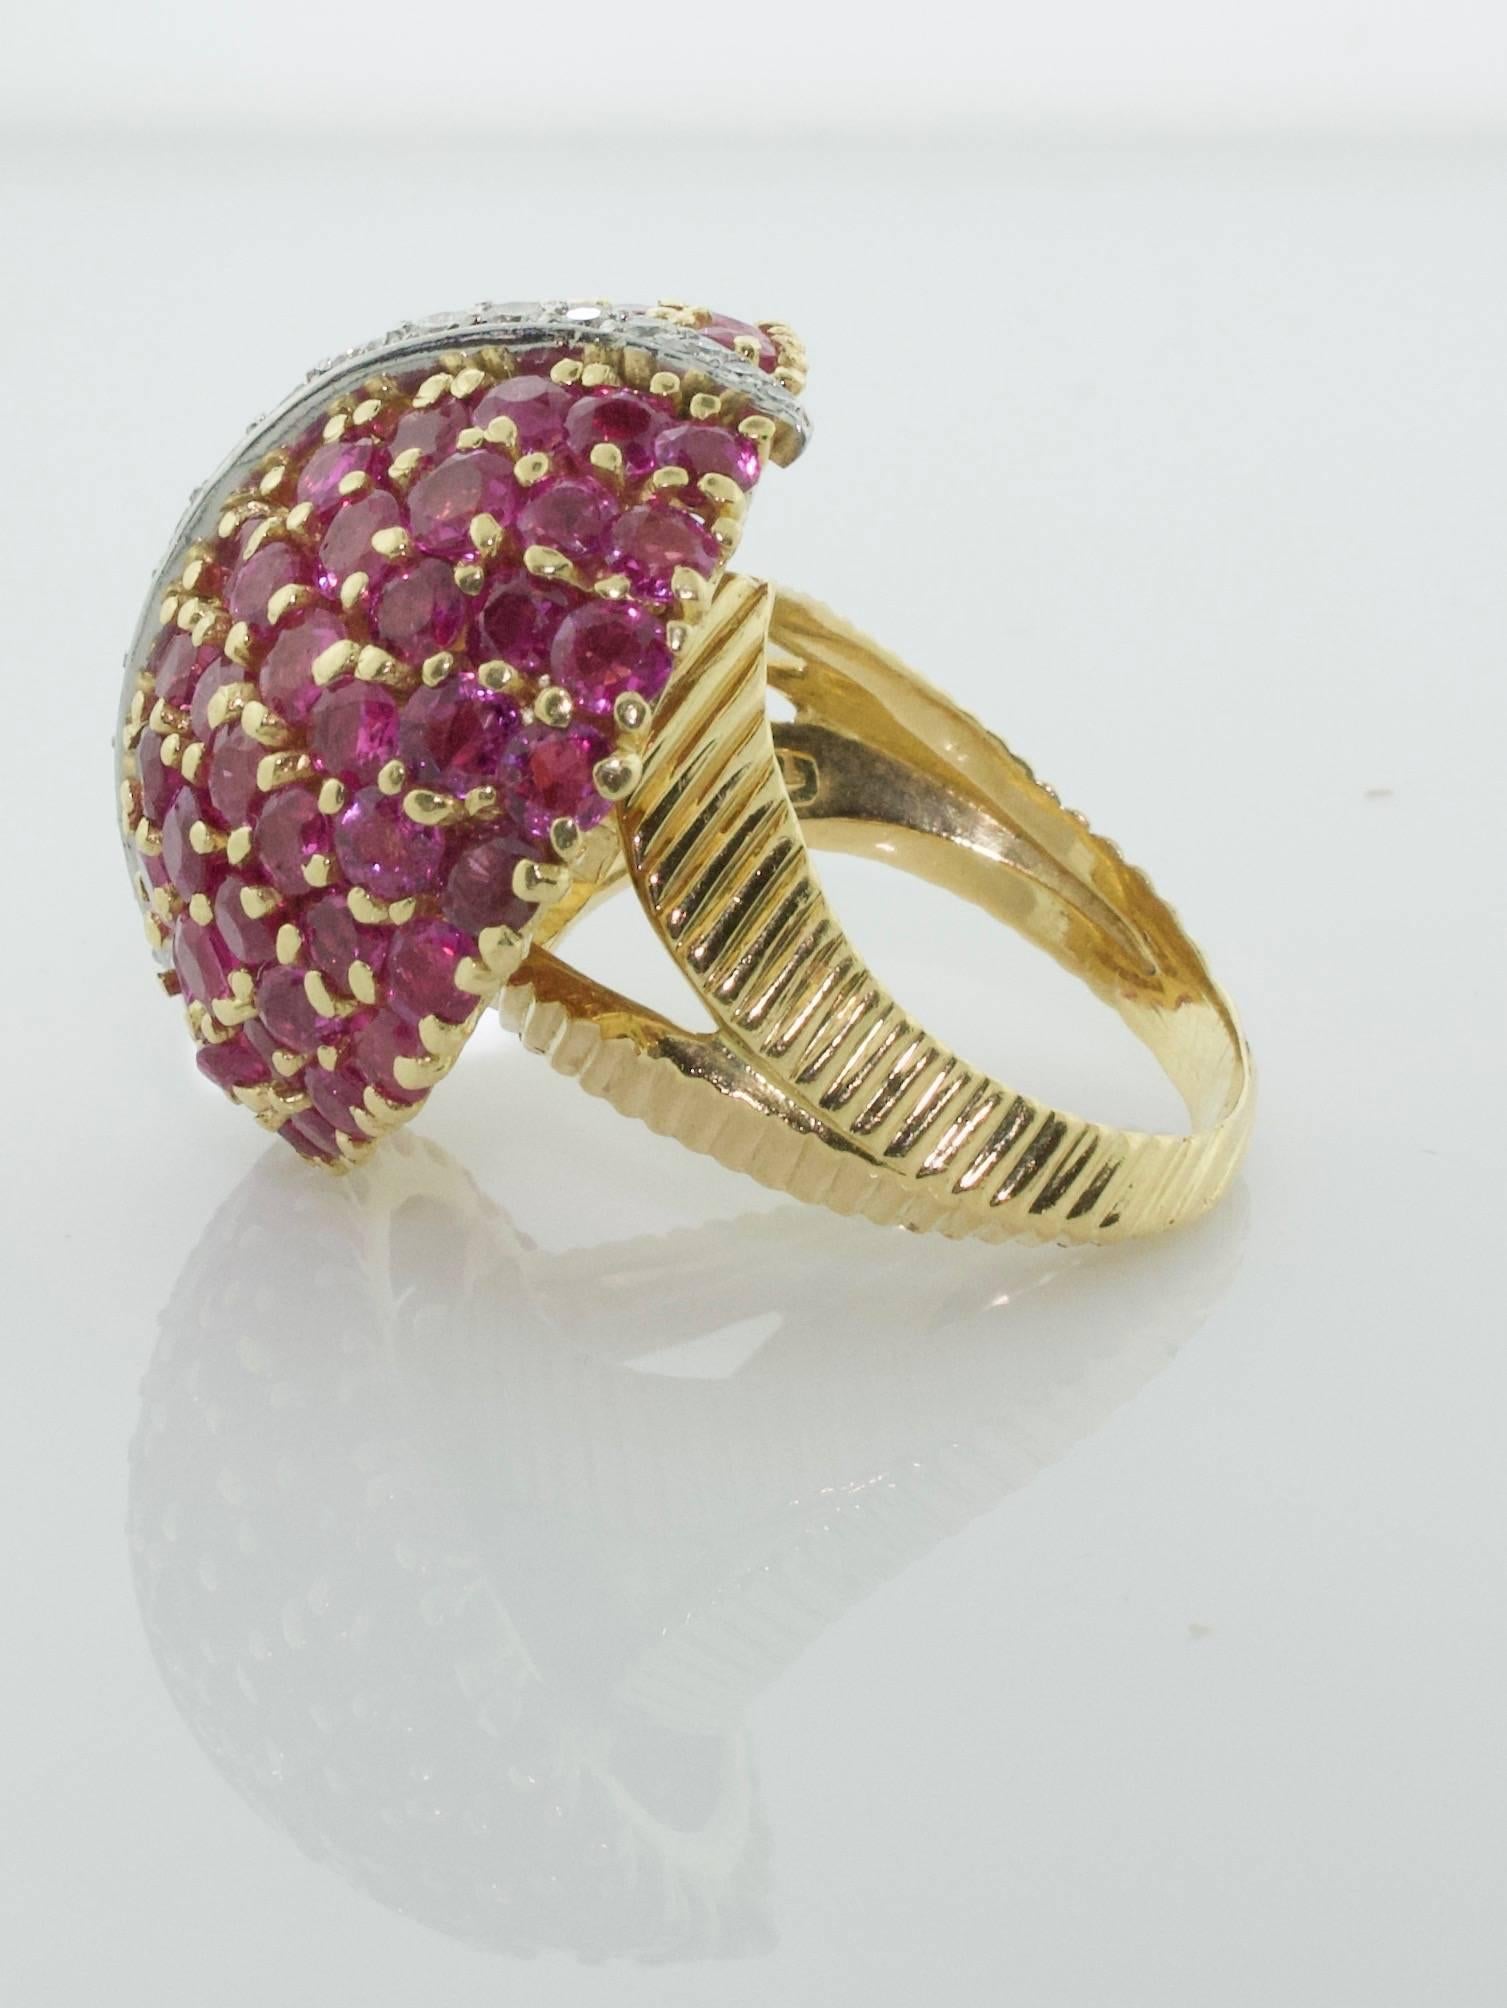 Modernist Tiffany & Co. Ruby and Diamond Dome Ring, circa 1940s